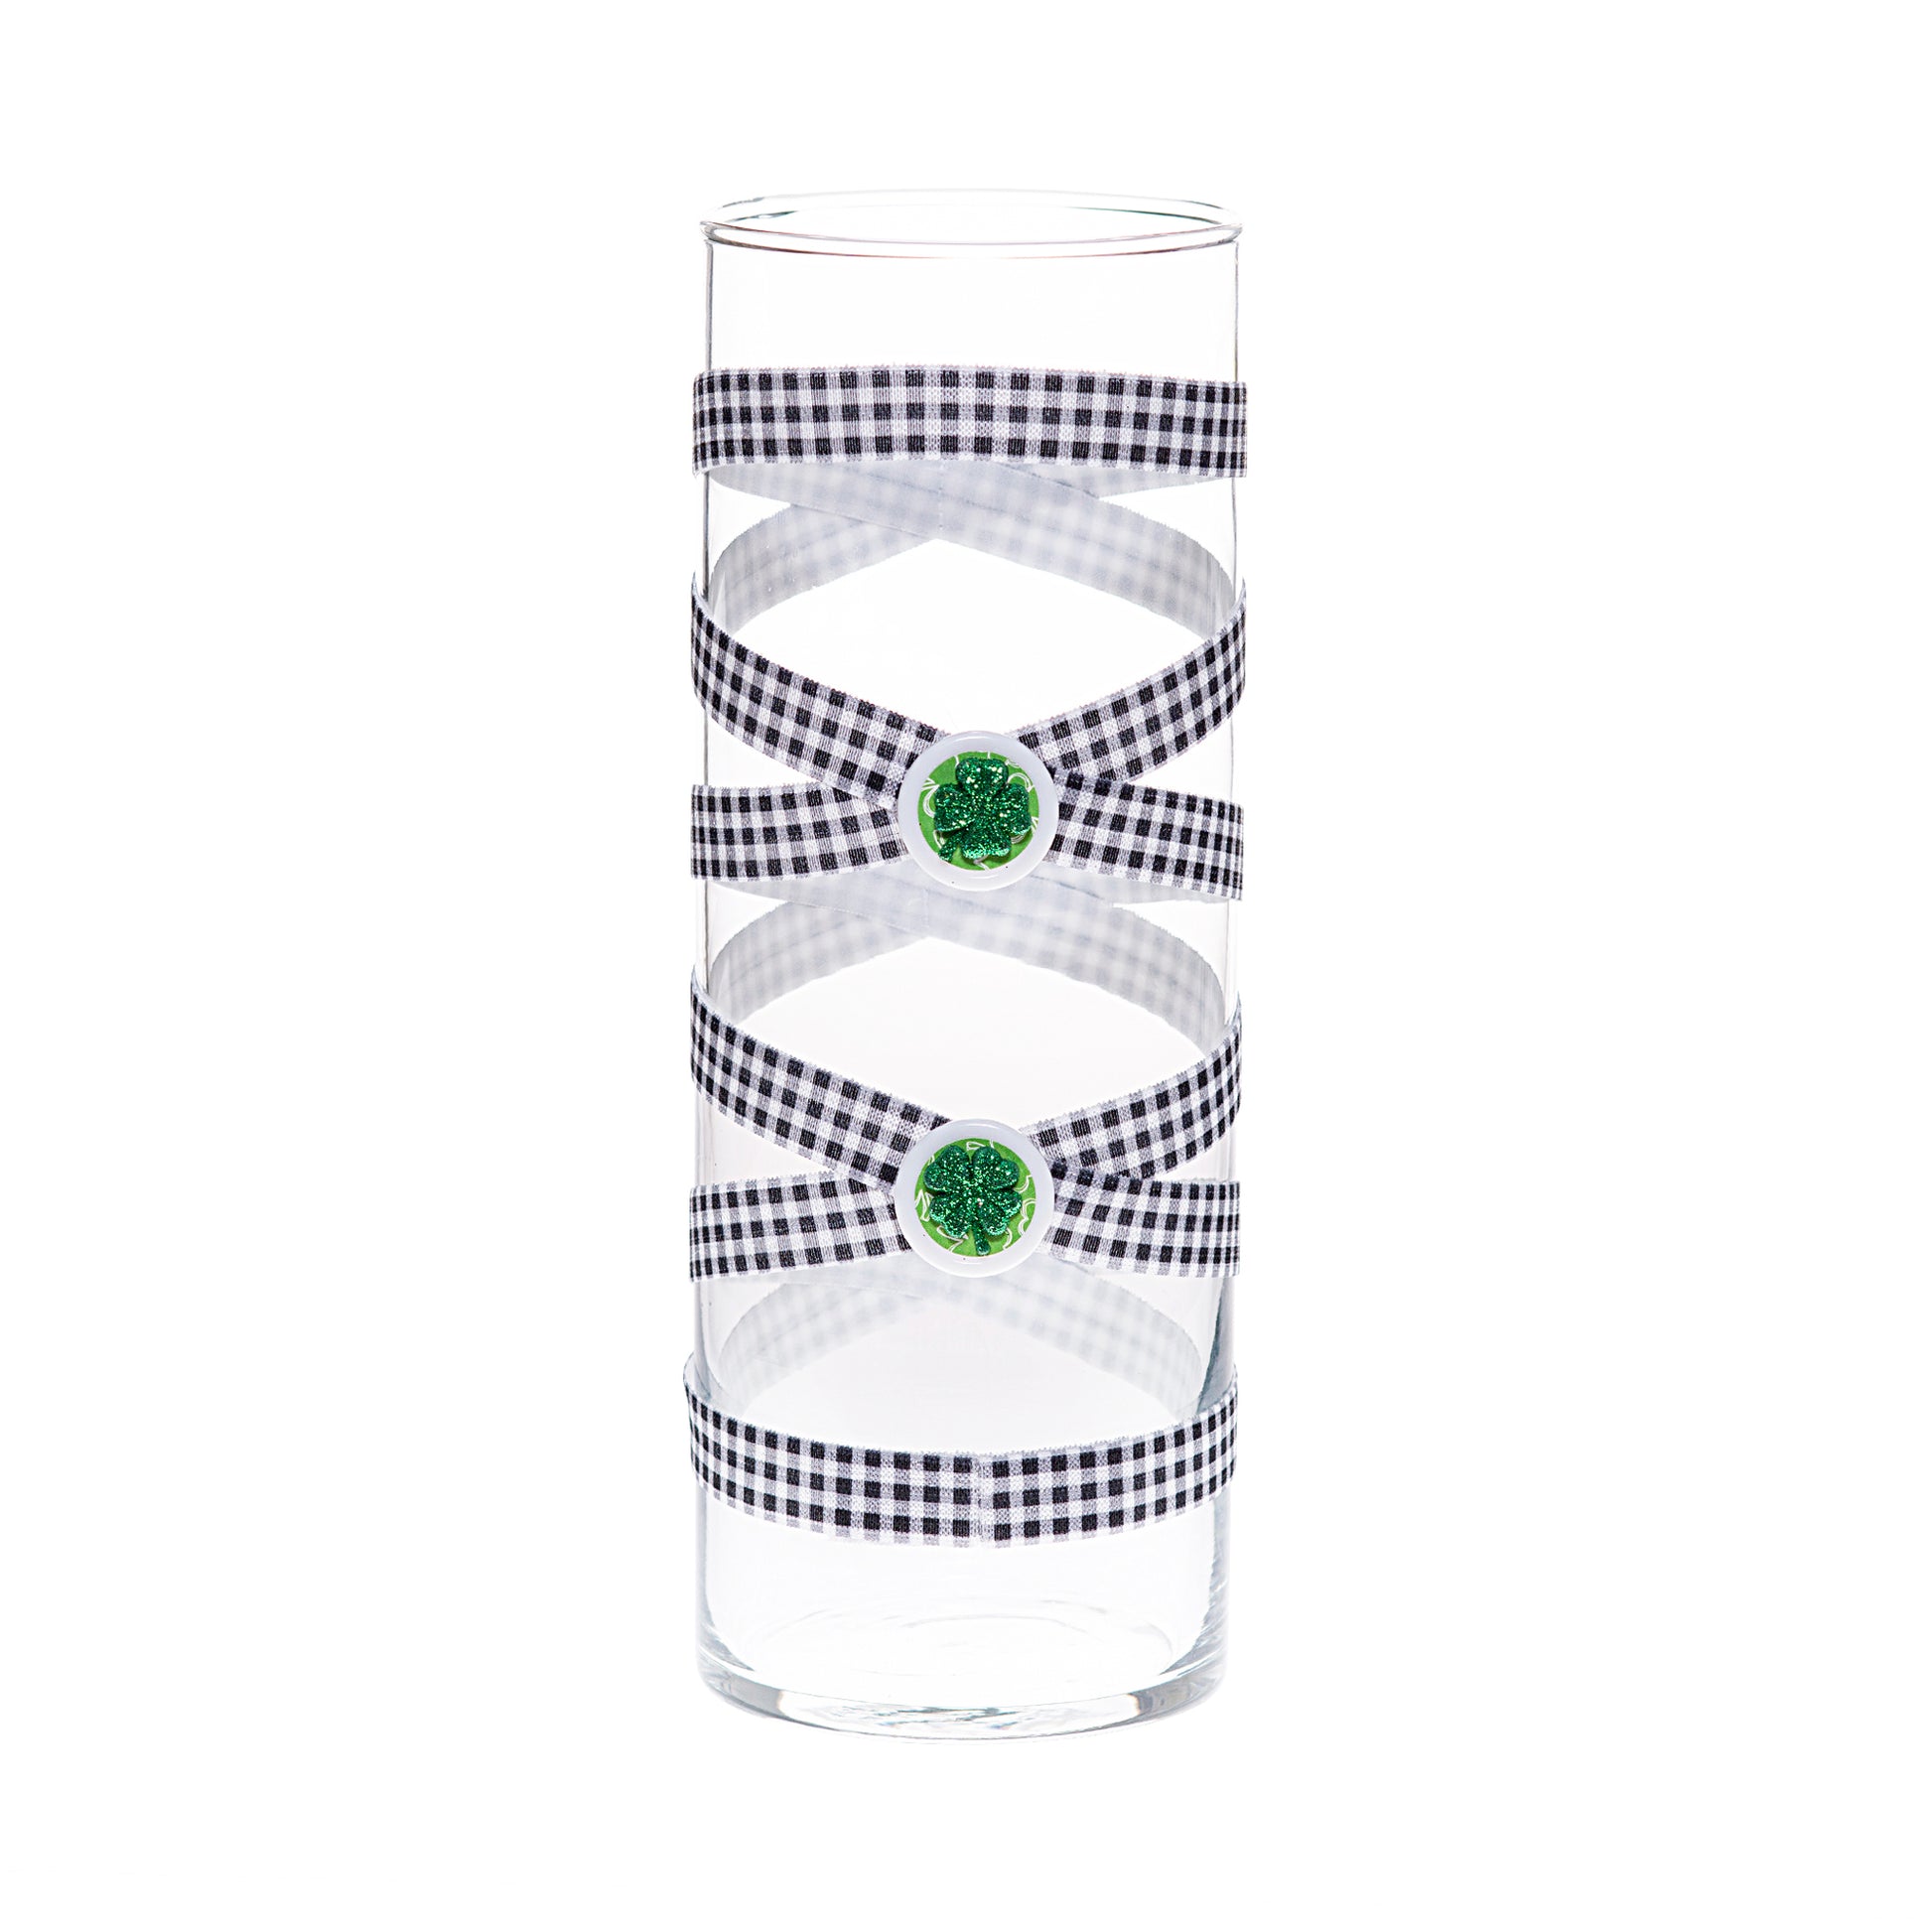 Back of Glass Wrappings 10" bud vase wrapped in black & white check elastic, decorated with 2 glitter shamrocks.